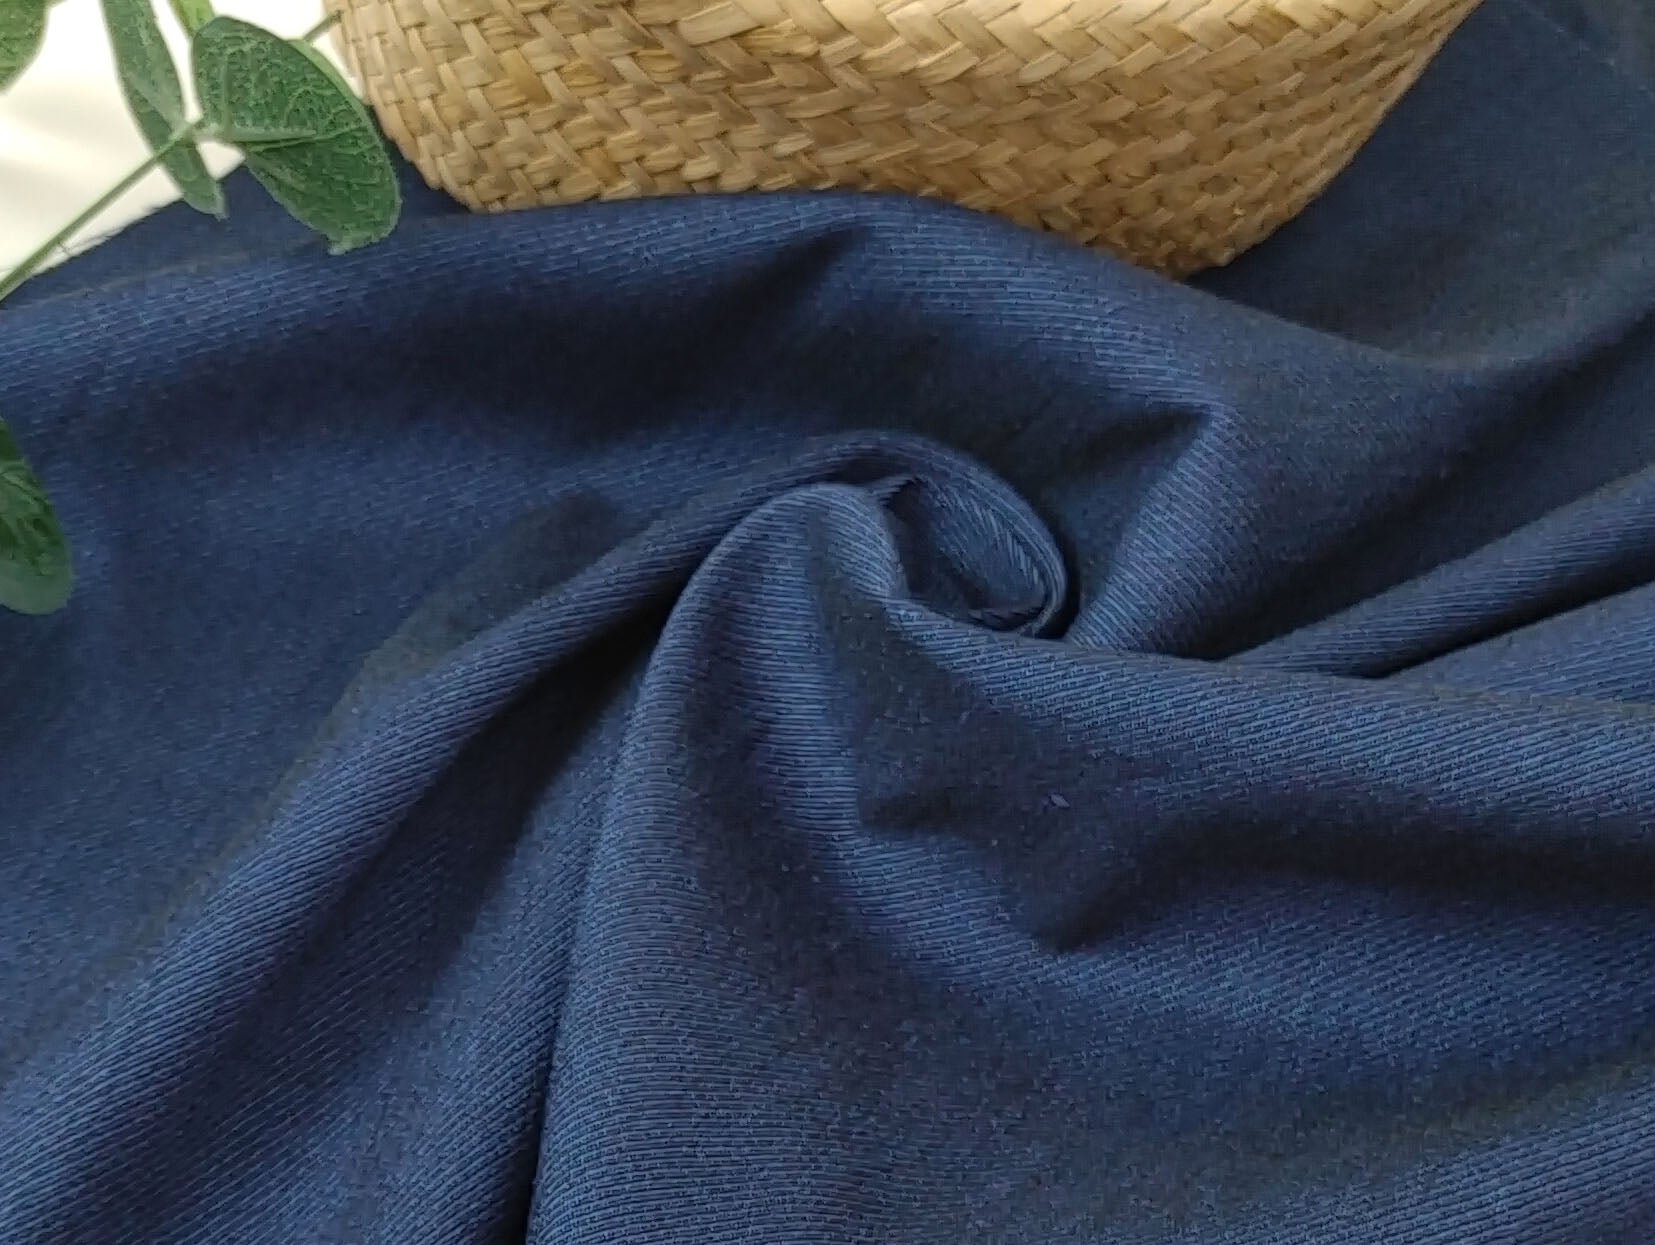 Linen Cotton Stretch Twill: Denim-Inspired Style Fabric 5988 - The Linen Lab - Navy